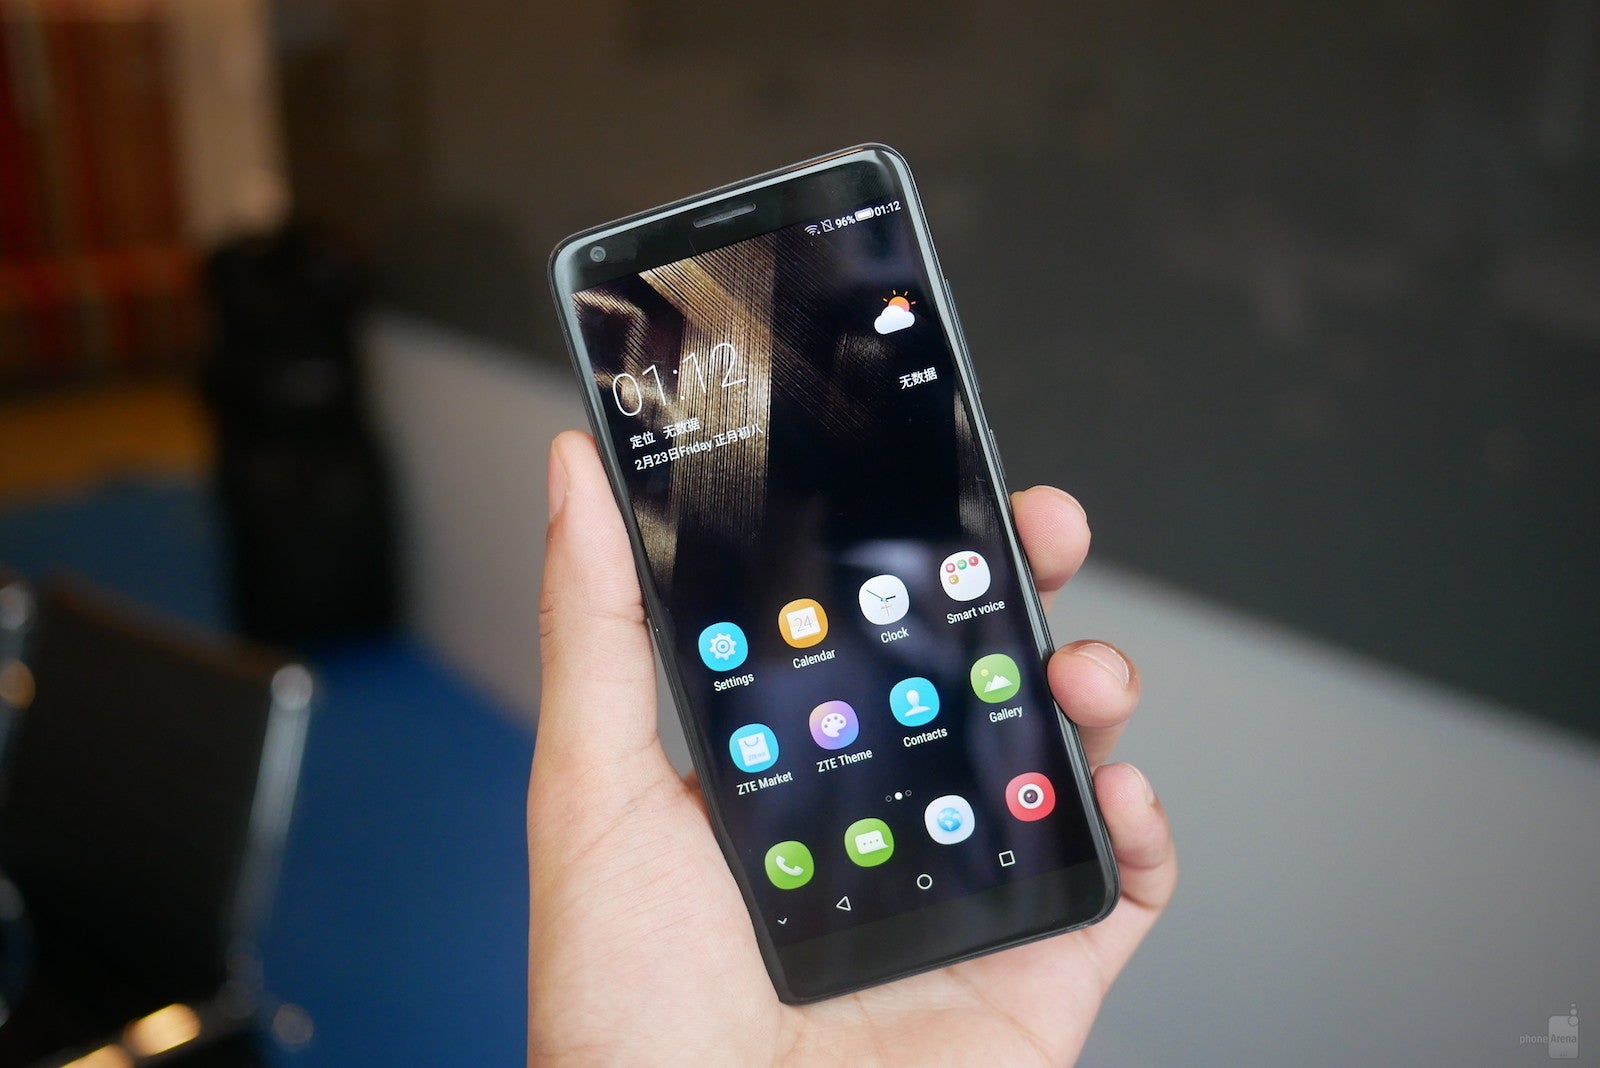 ZTE Blade V9 and V9 Vita hands-on: the 18:9 mid-rangers are coming, with dual-cameras too